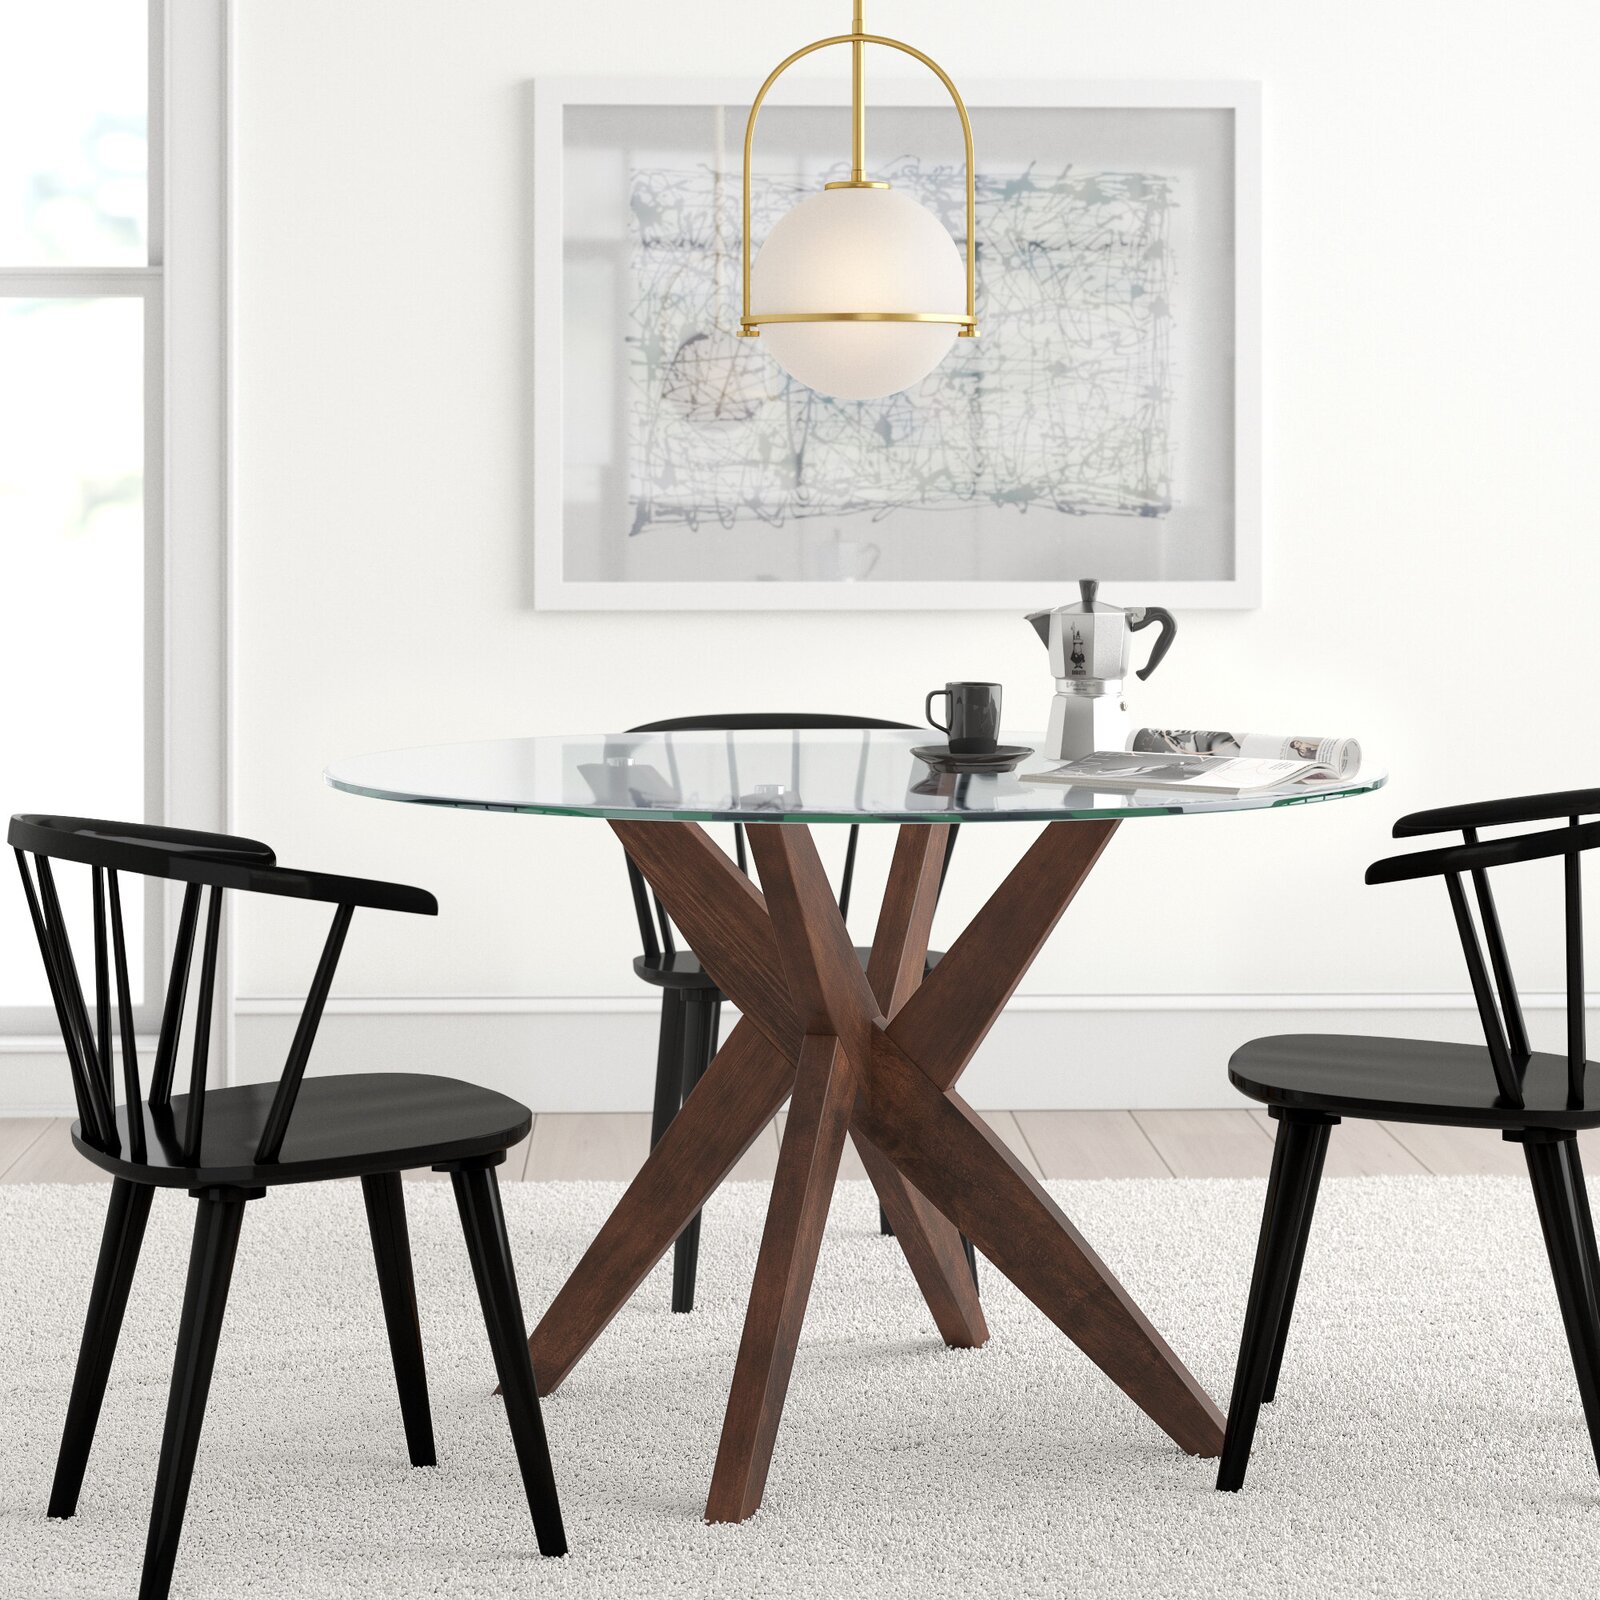 Tabor+48%27%27+Pedestal+Dining+Table